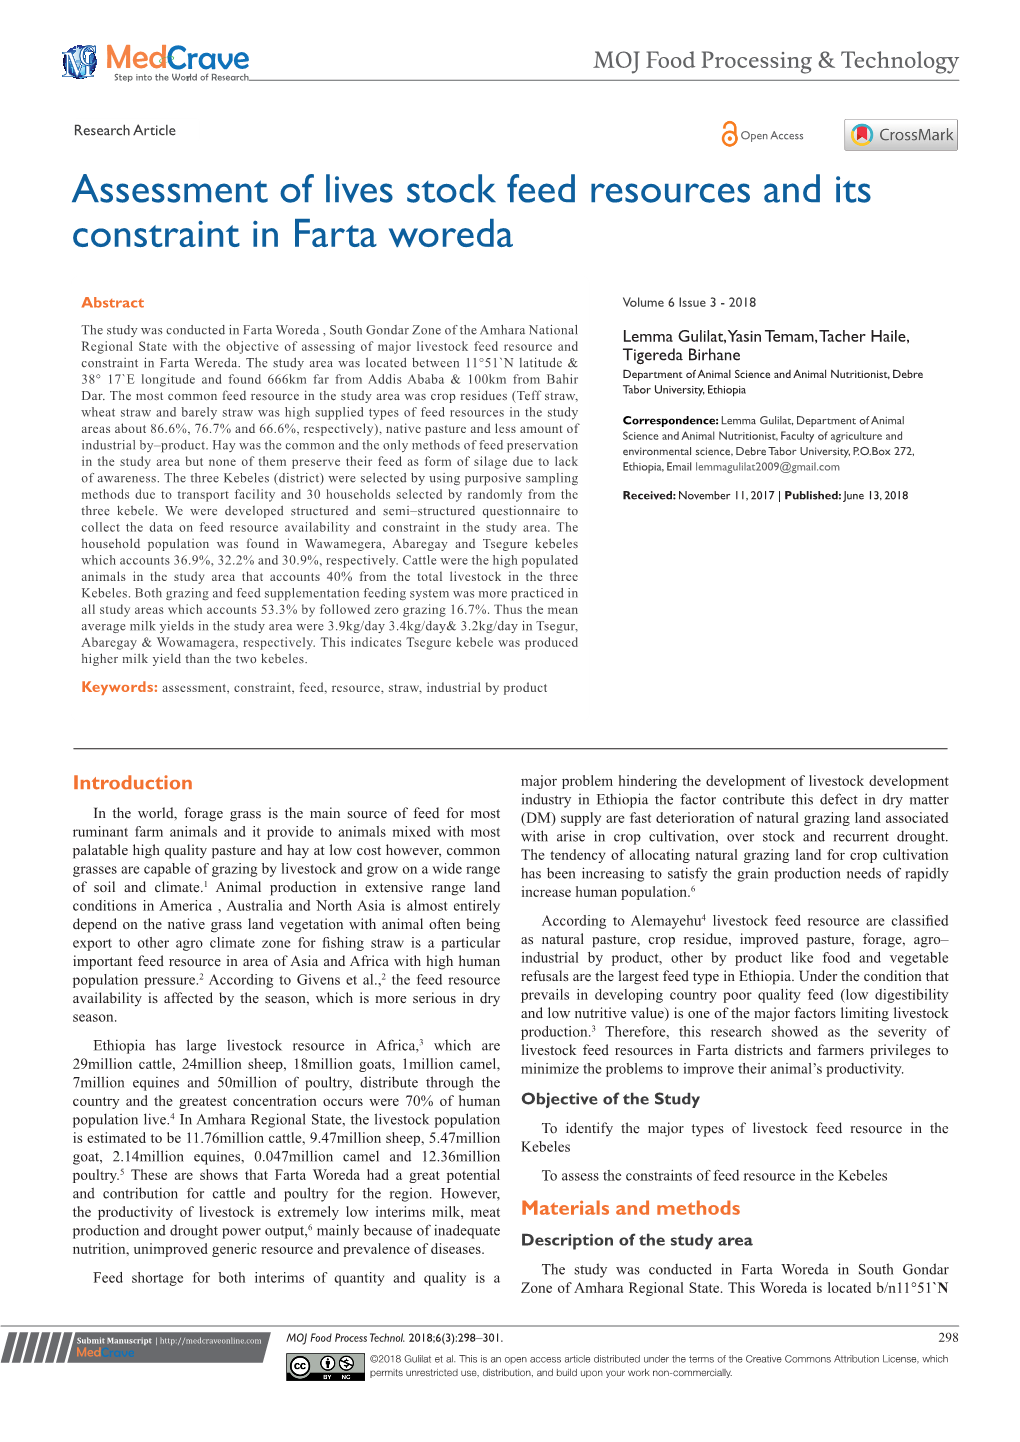 Assessment of Lives Stock Feed Resources and Its Constraint in Farta Woreda